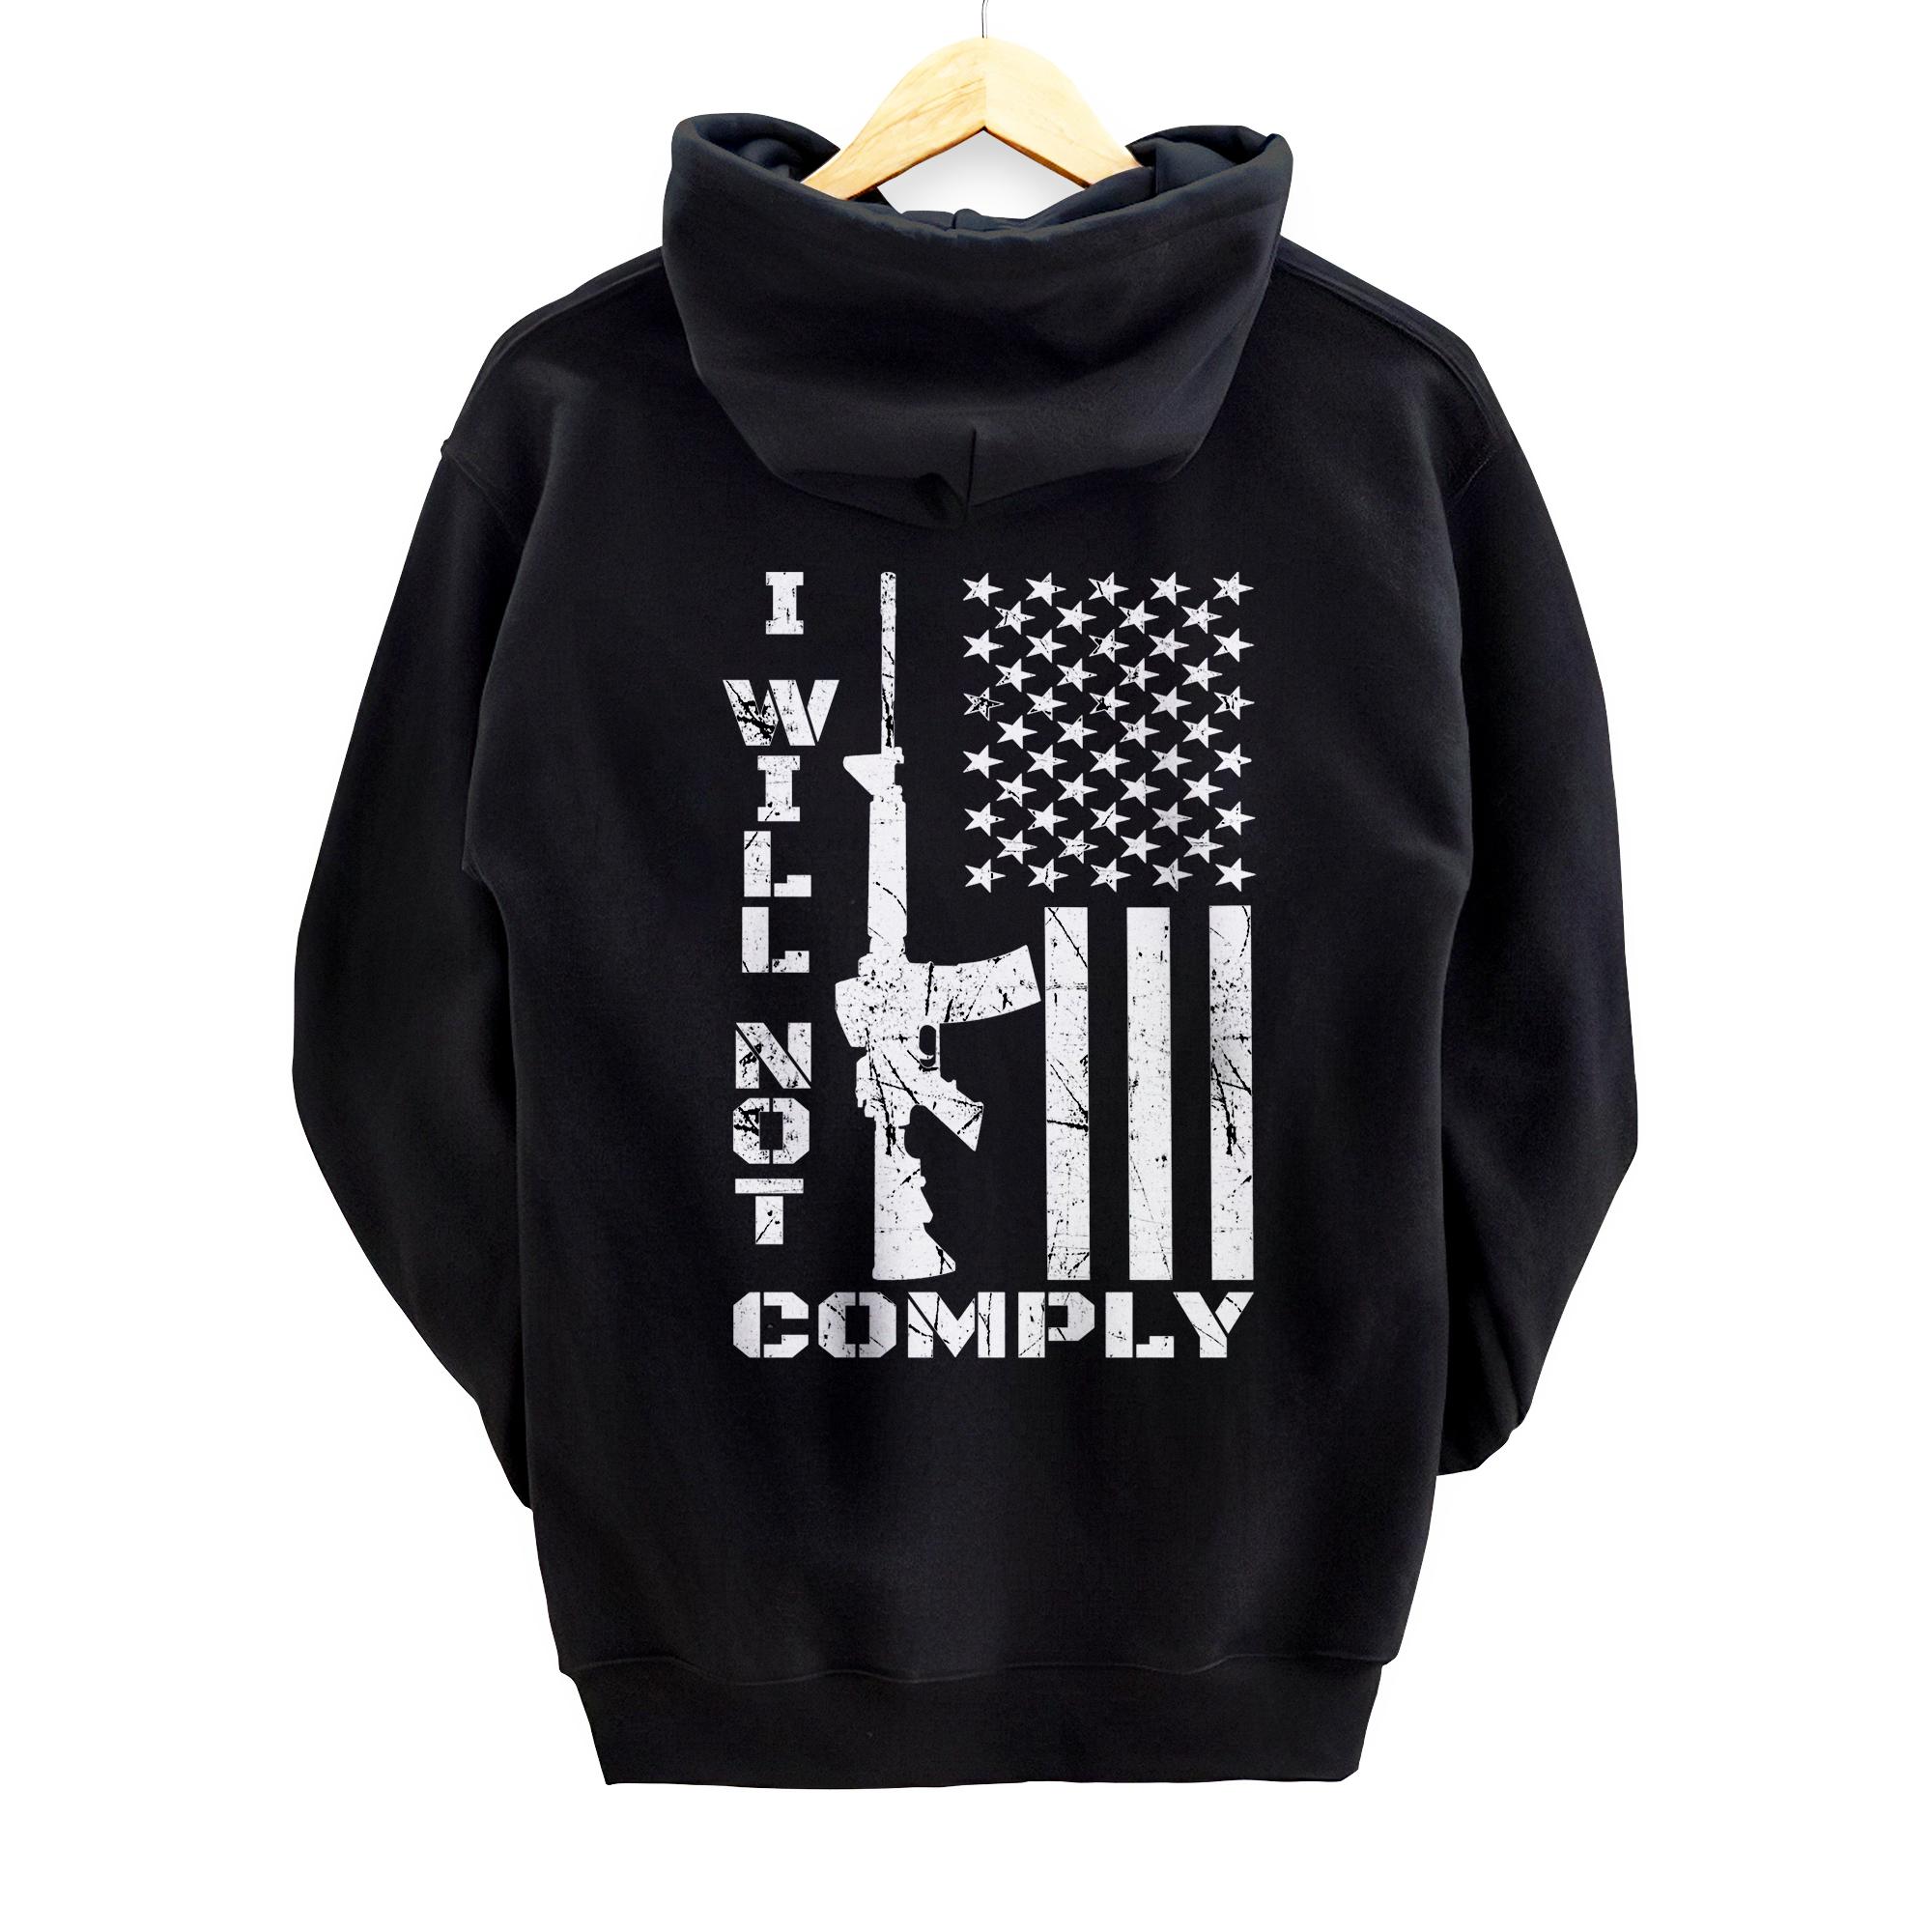 I WILL NOT COMPLY Ar15 (Back) Ar-15 Gift For Men Women Pullover Hoodie